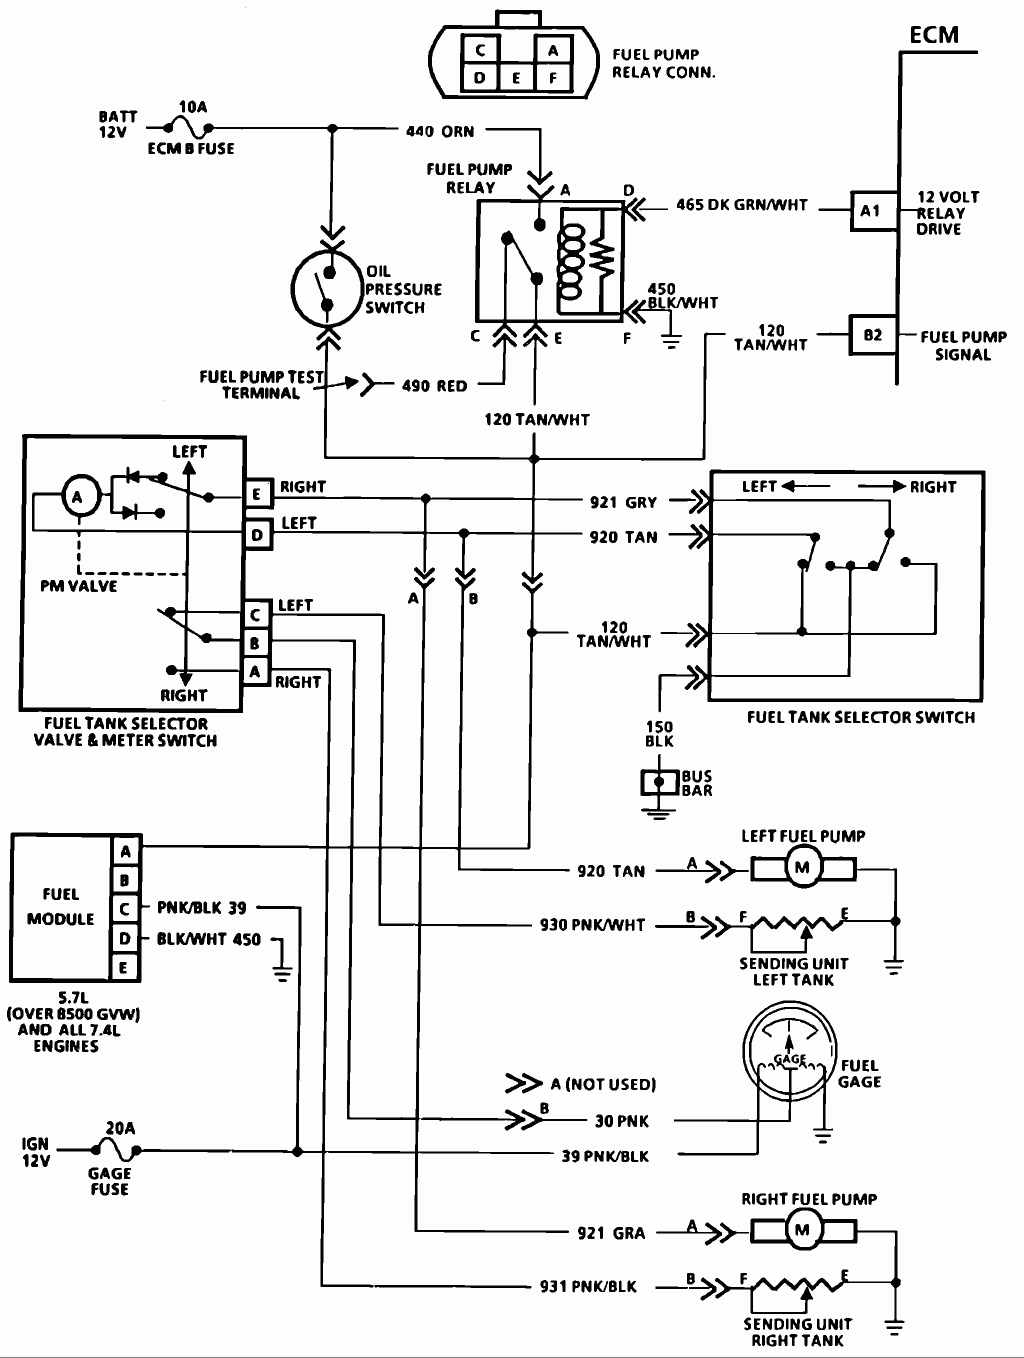 91 Chevy Ac Wiring | Wiring Library - 1991 Chevy Truck Wiring Diagram